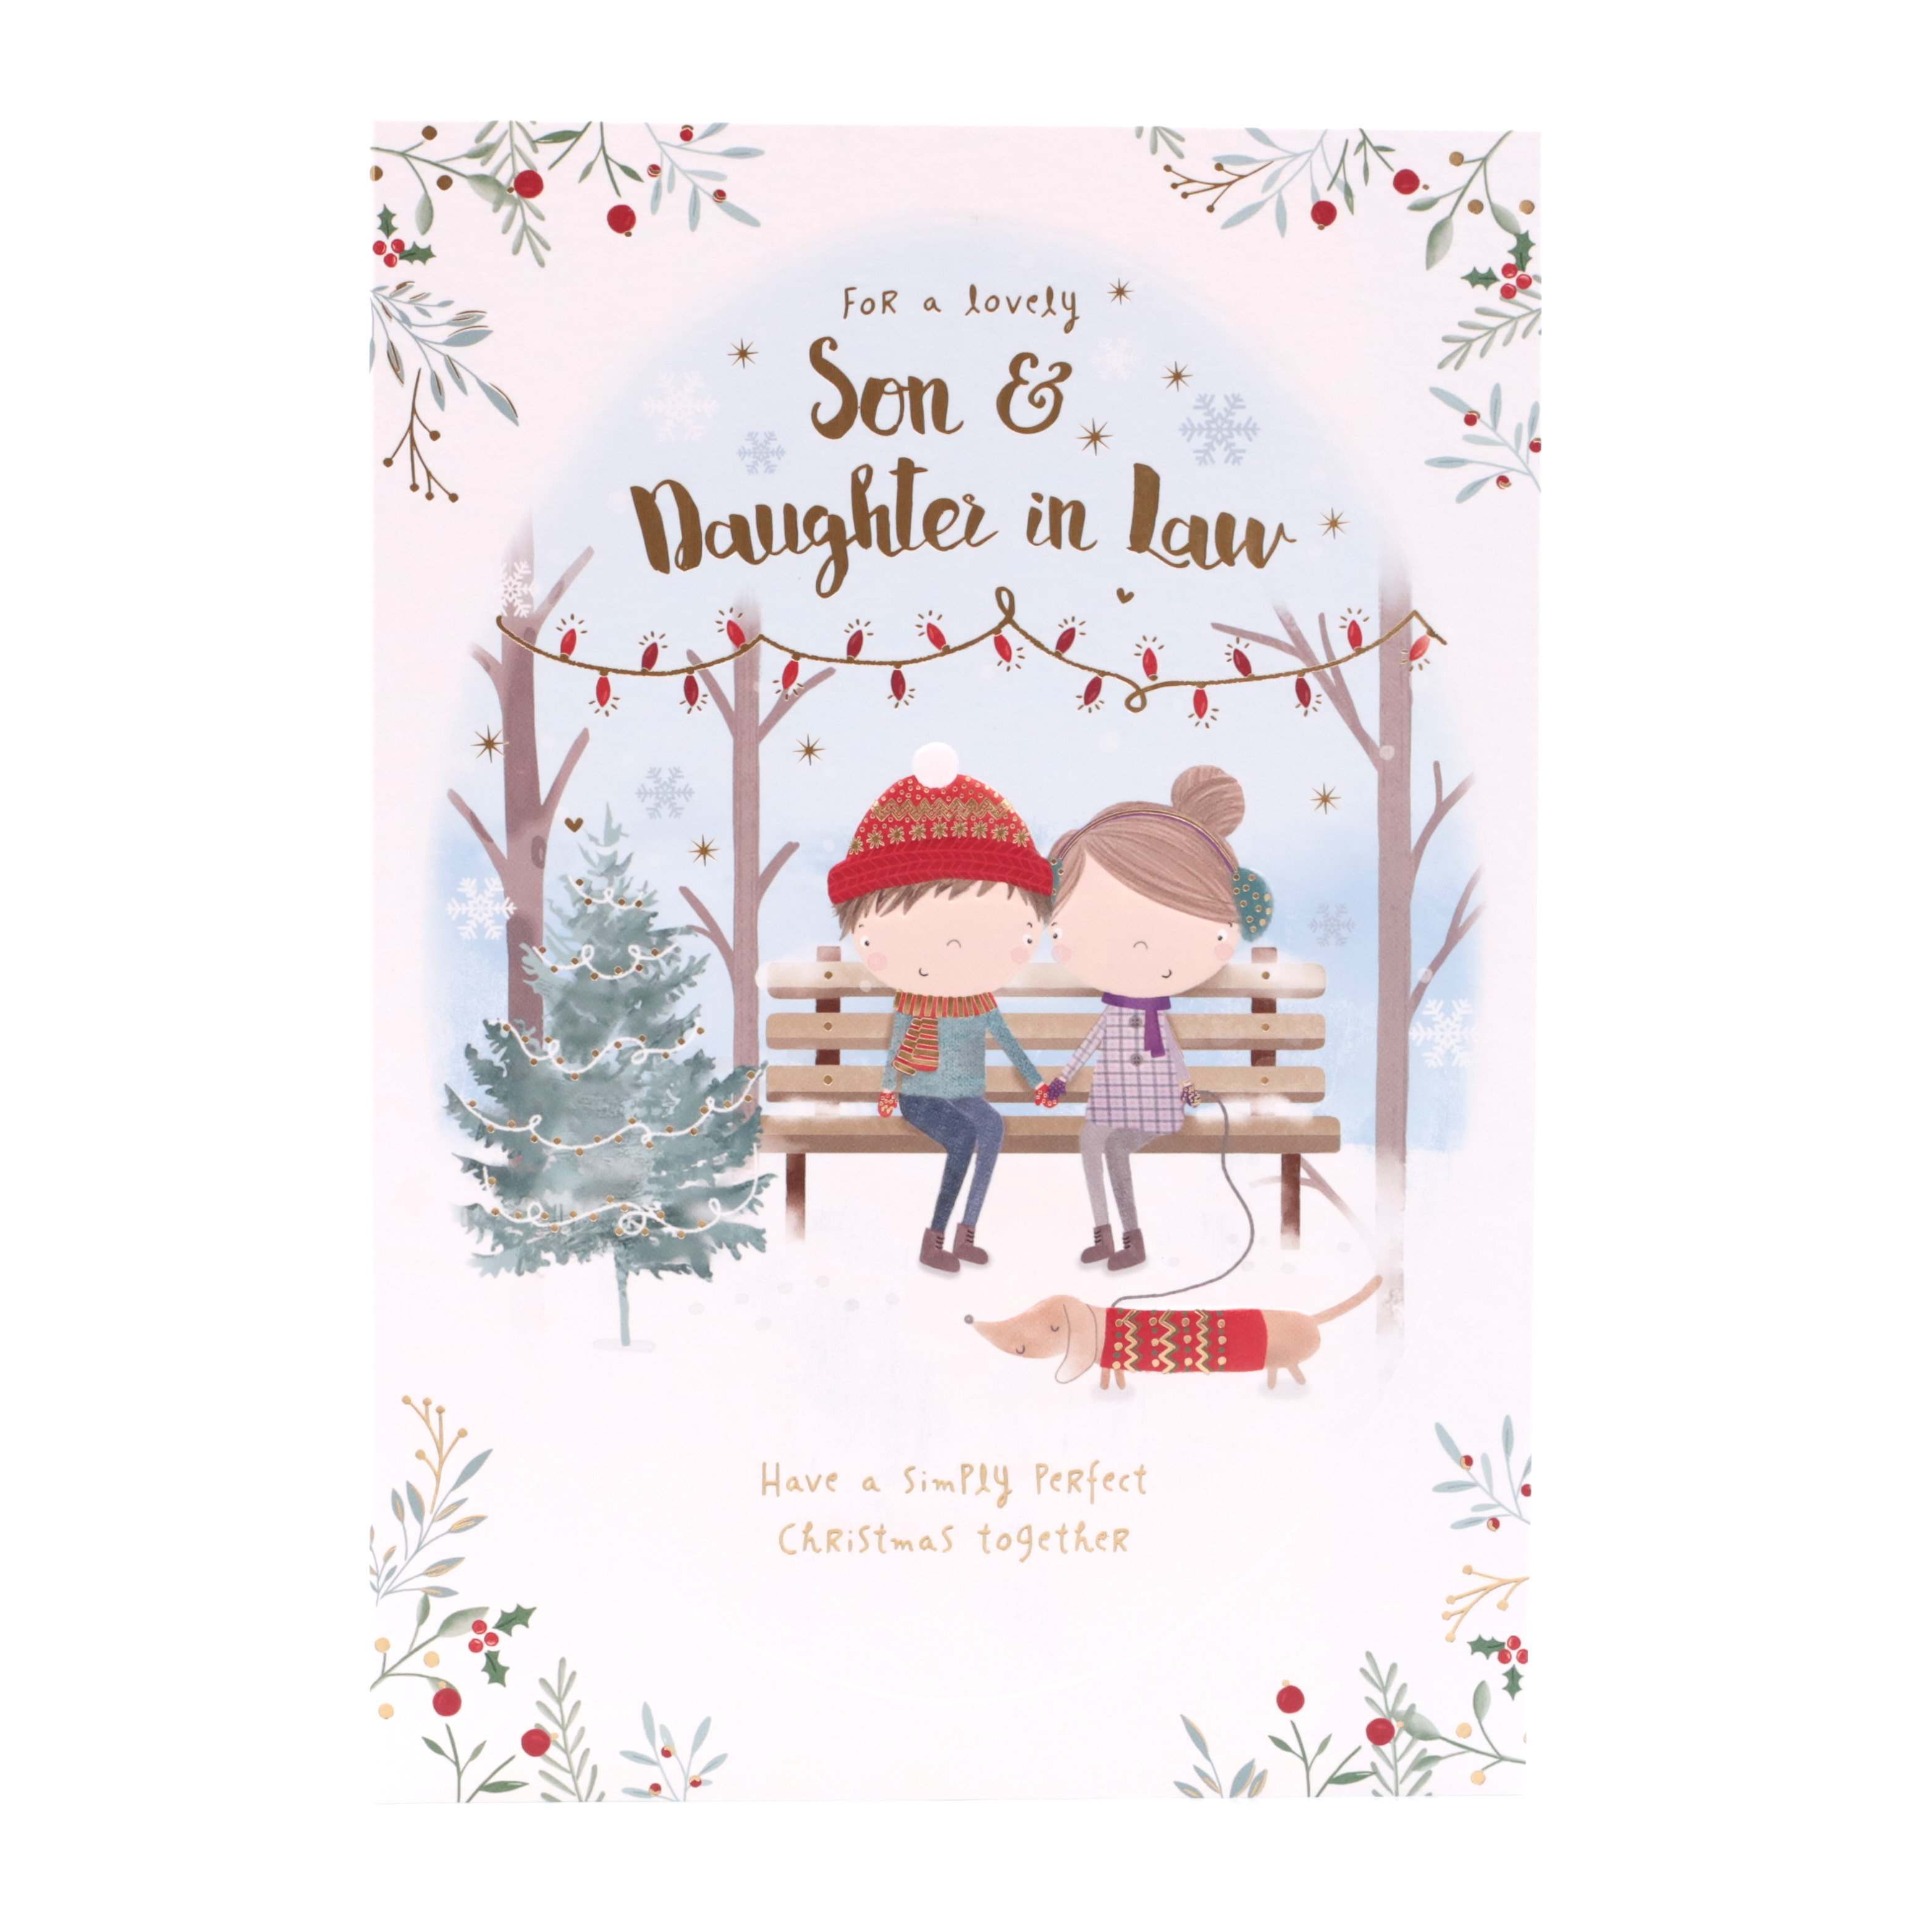 Christmas Card - Son And Daughter In Law, Cute Couple On Bench